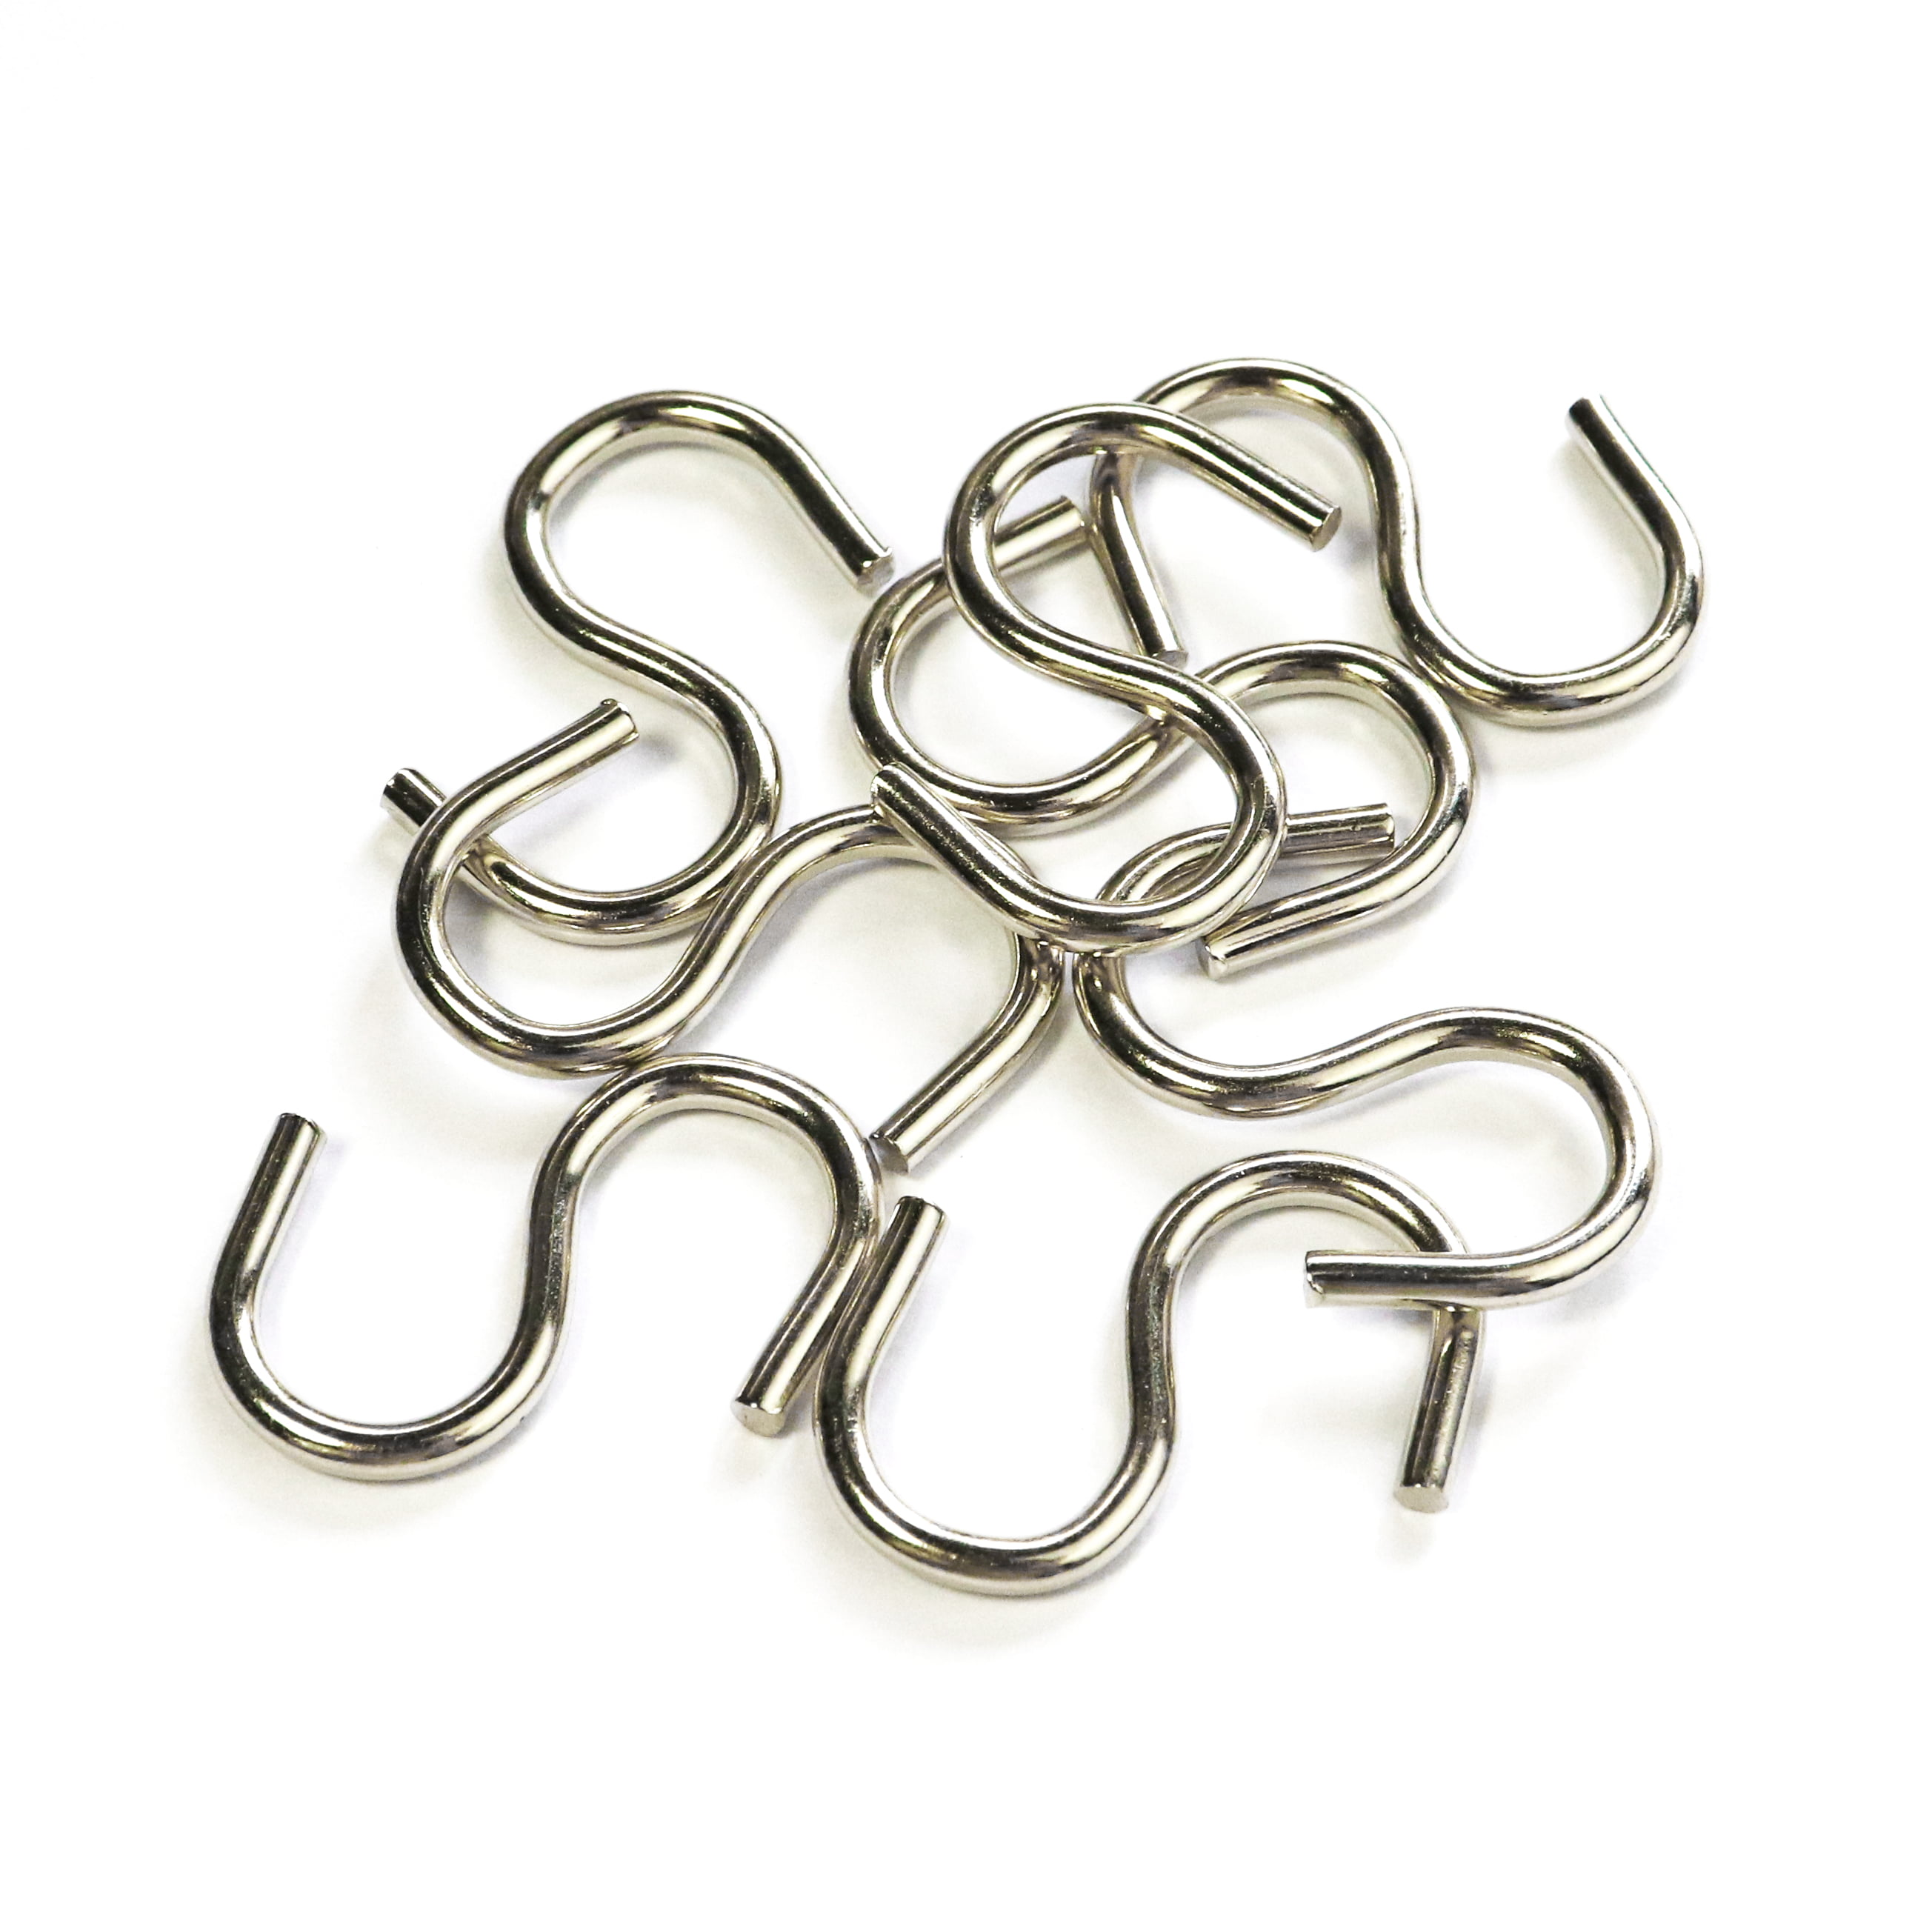  Senkary 200 Pieces 1/2 Inch Small S Hooks Mini S Hooks Tiny  Metal S-Shaped Hooks for Crafts, Jewelry and Hanging (Black) : Home &  Kitchen